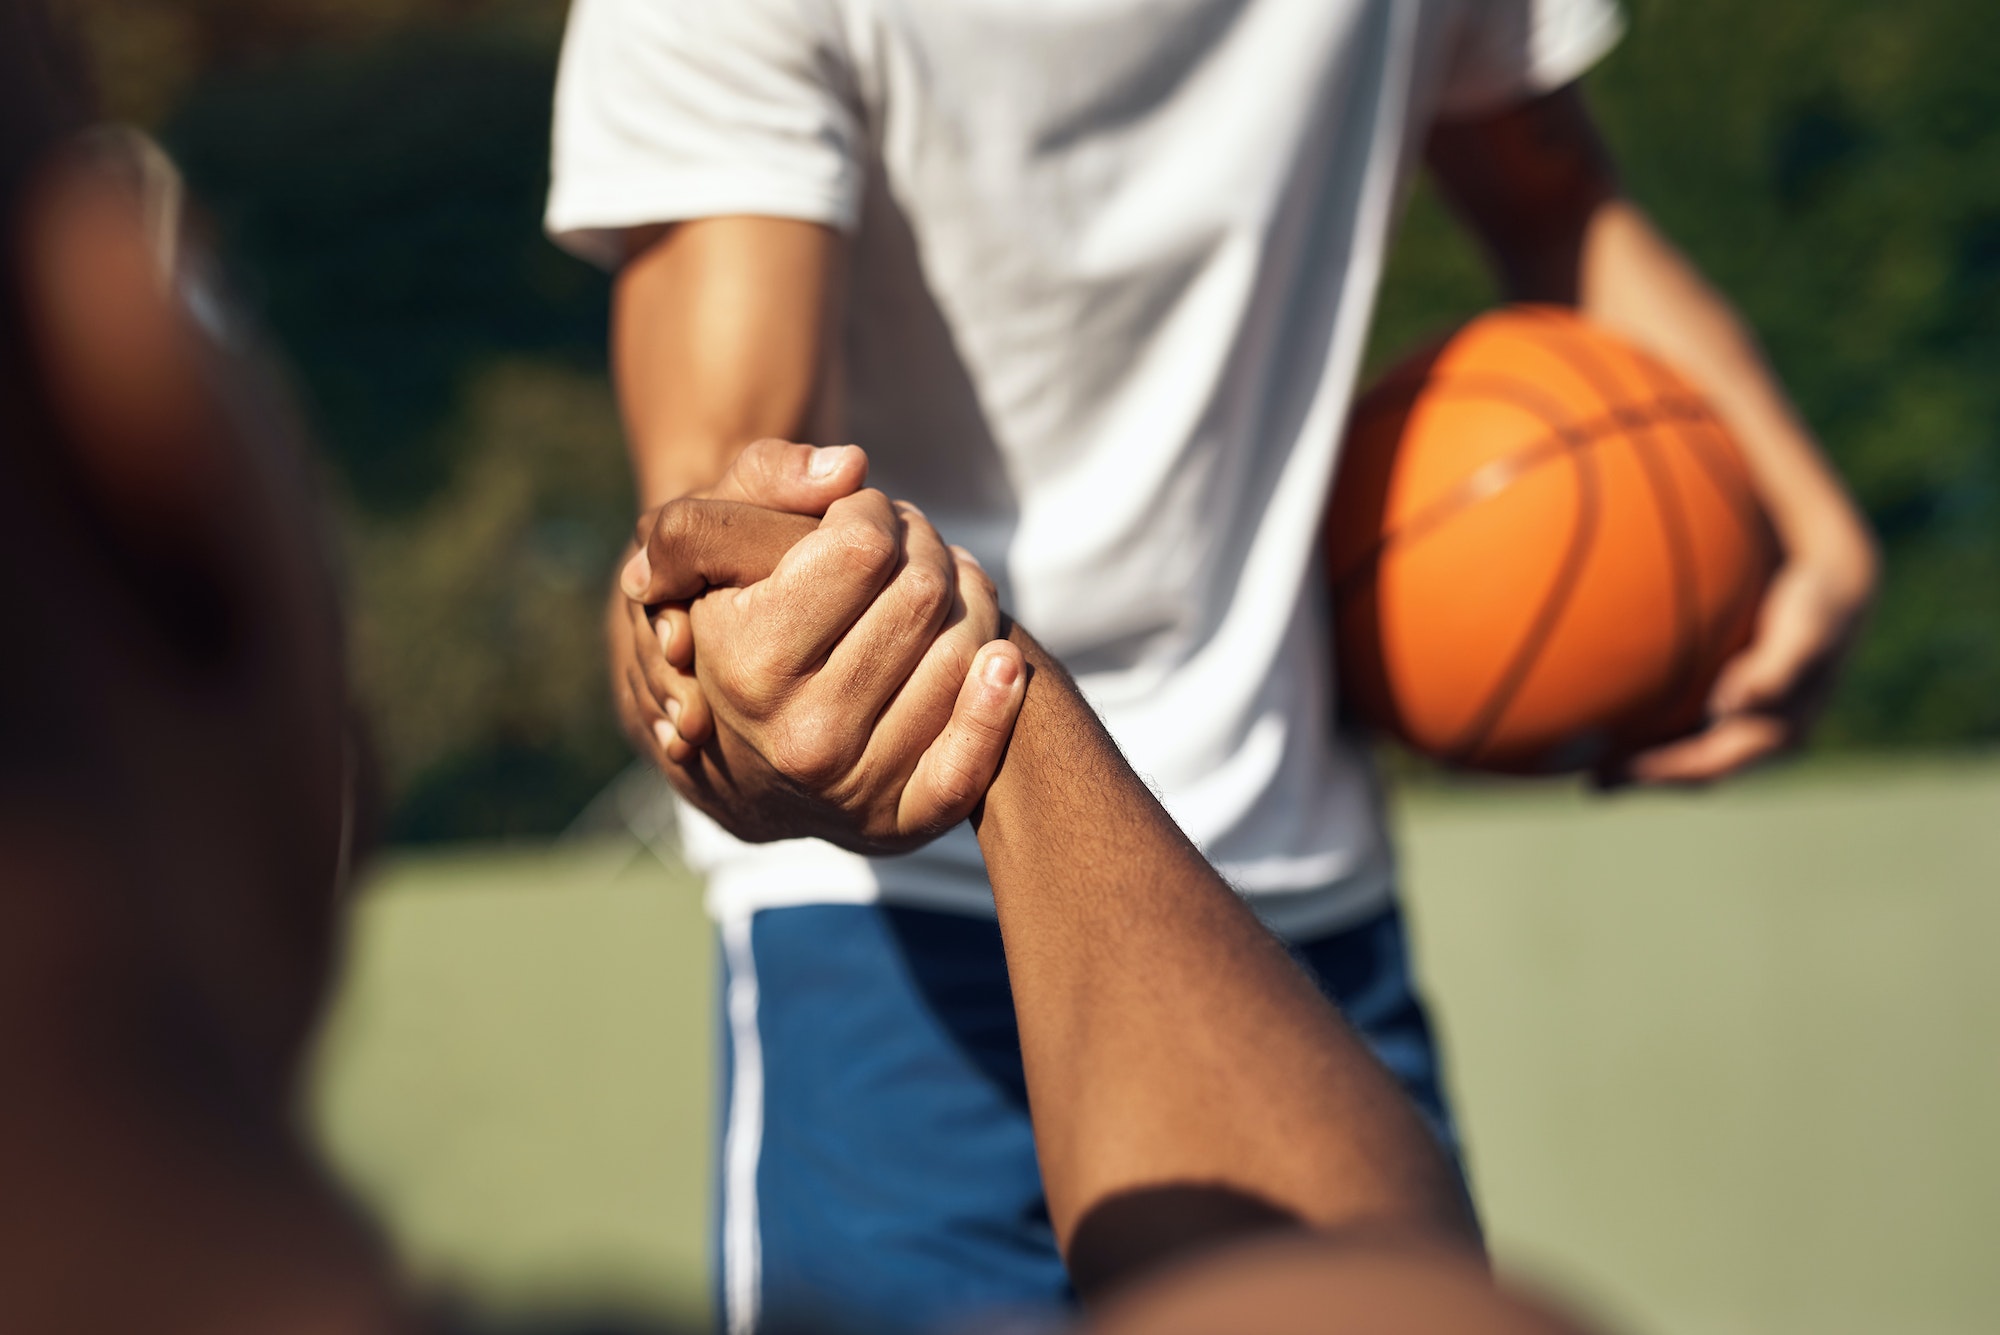 Closeup shot of two sporty young men shaking hands on a basketball court